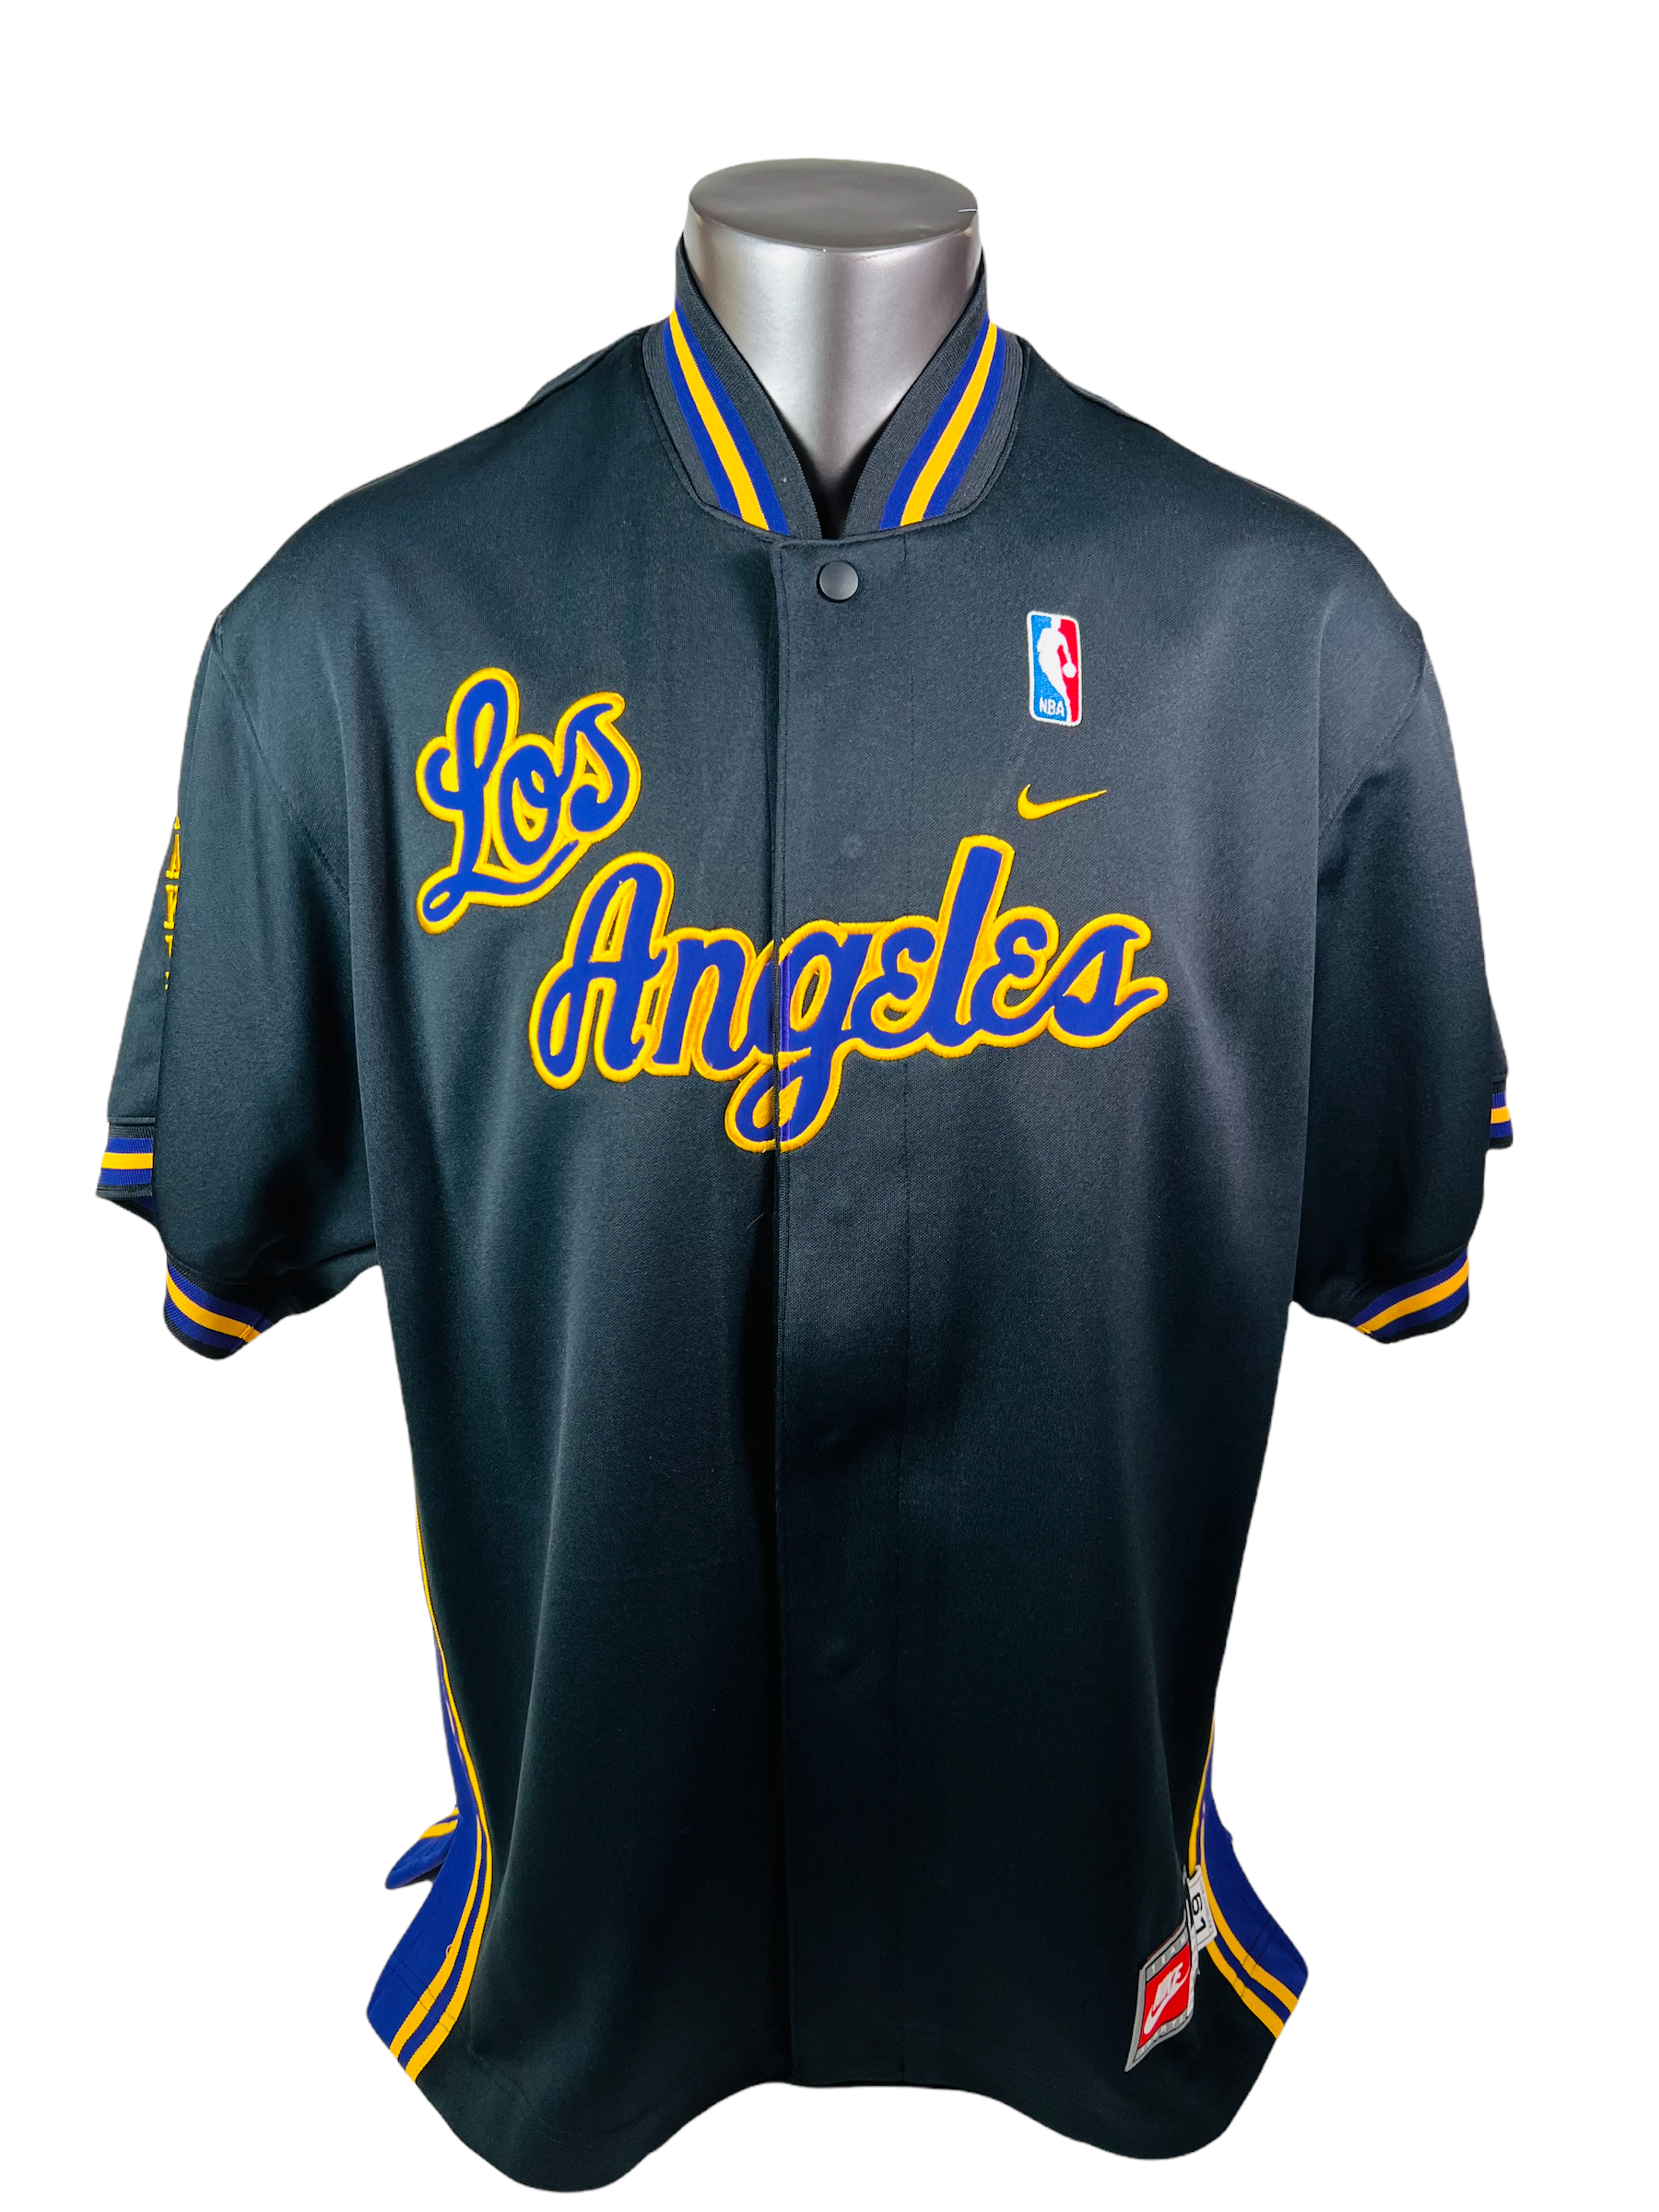 LOS ANGELES LAKERS VINTAGE 2000's RETRO TEAM NIKE WARM-UP JERSEY